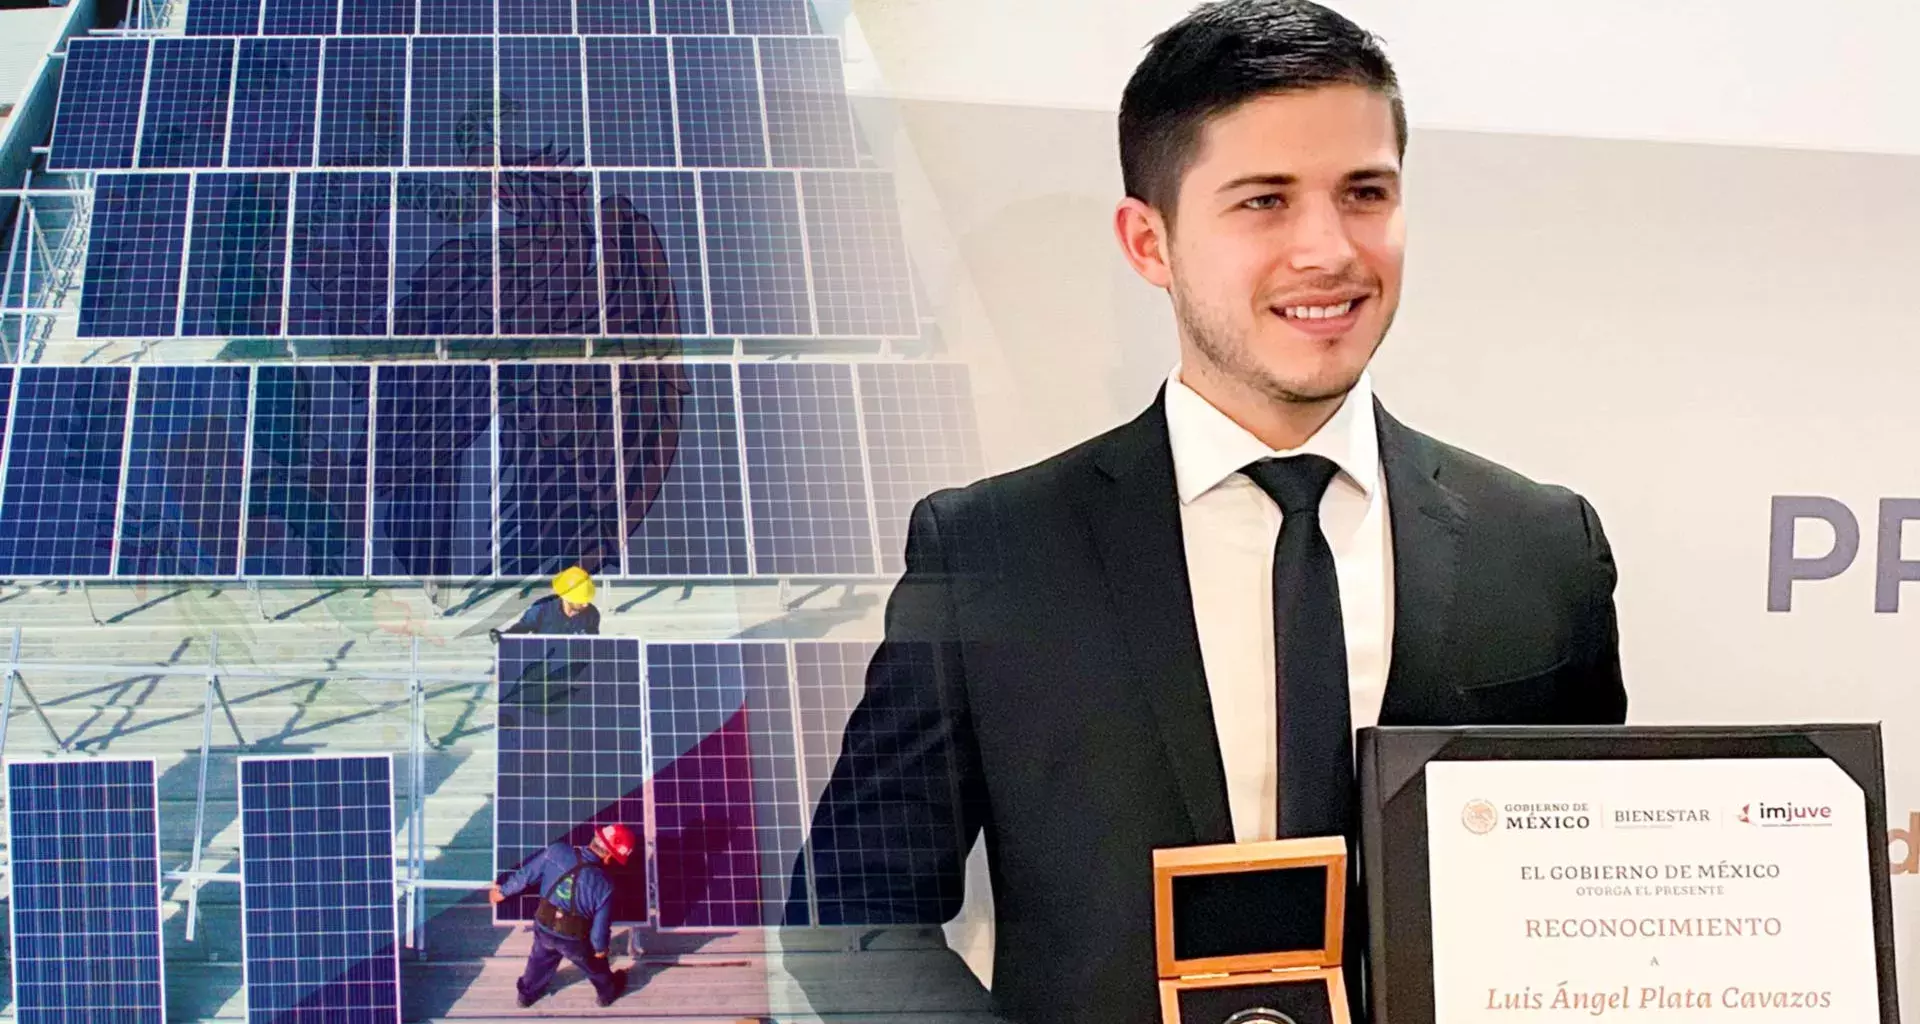 The young man trying to bring solar energy to rural areas and cities